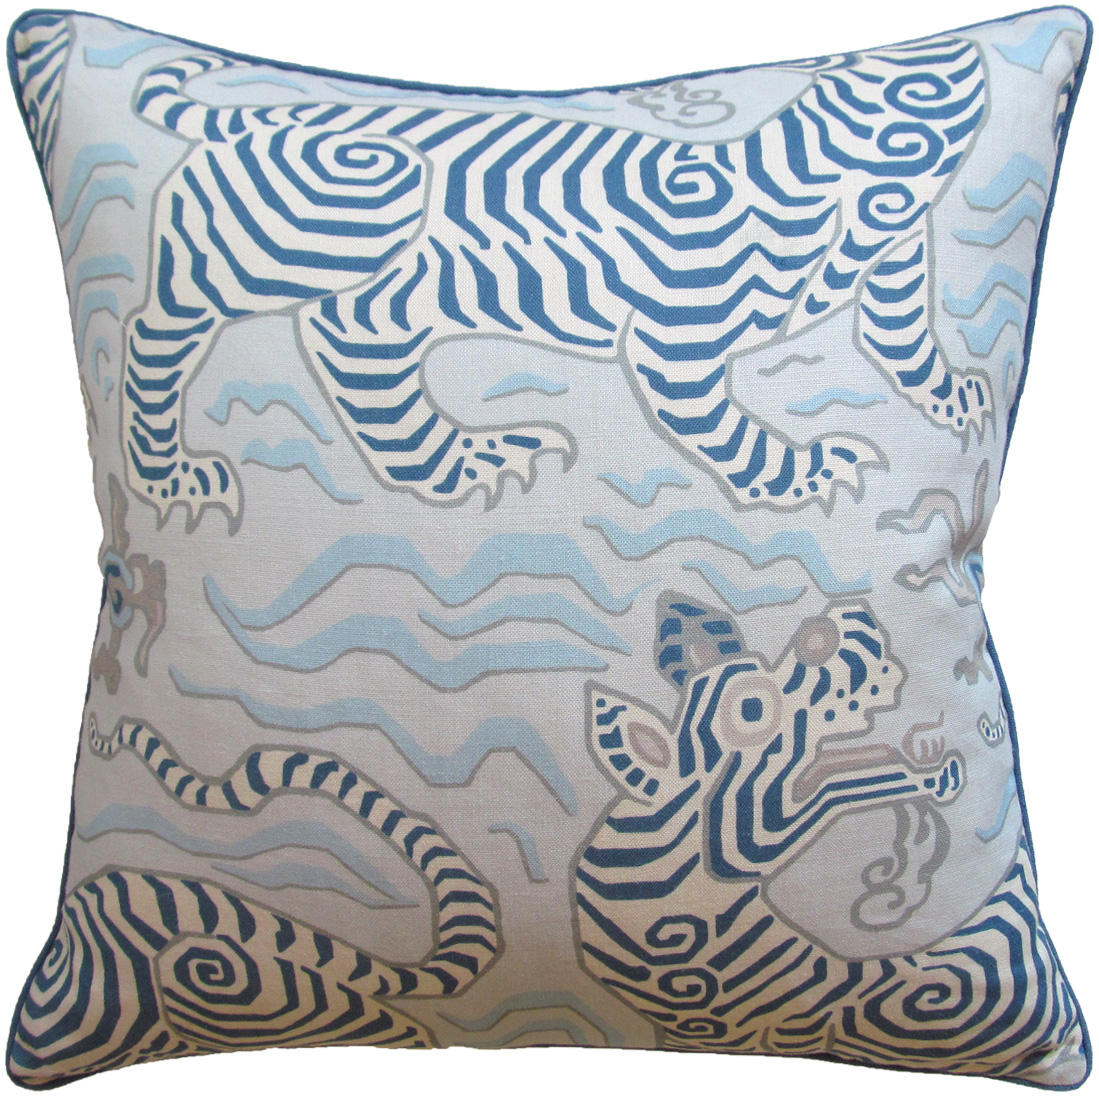 The boho chic Tibet Pillow in shades of blue with a tiger print design